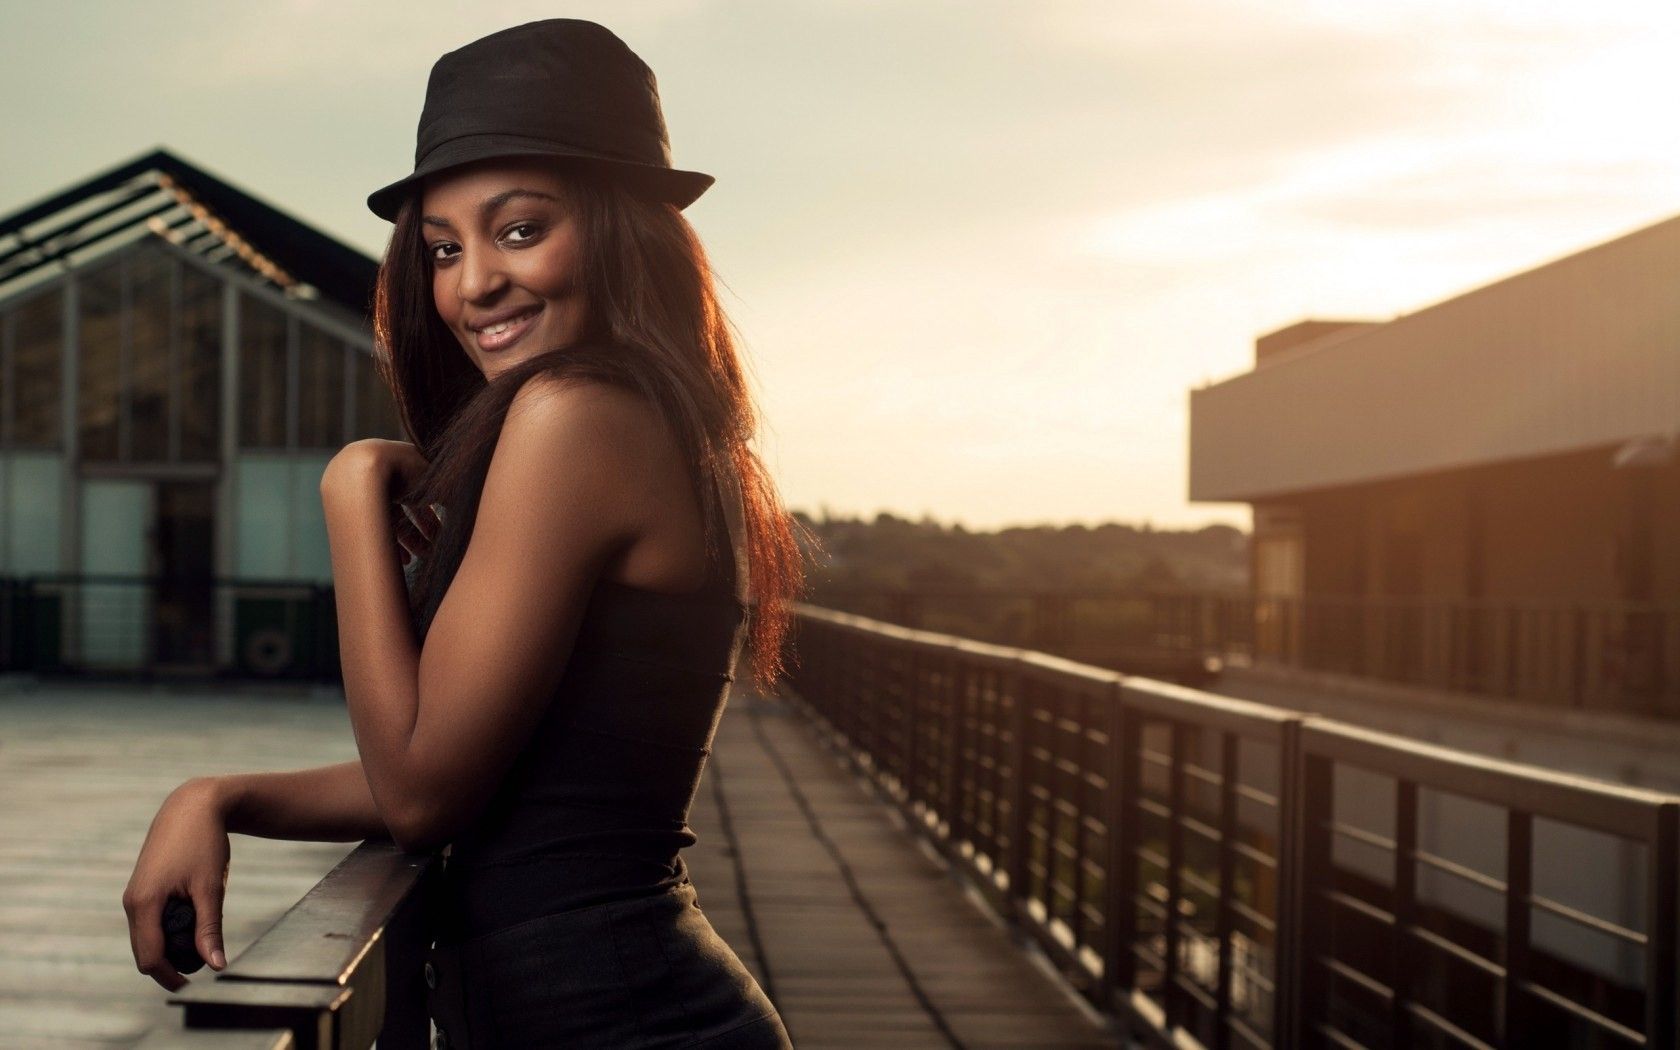 Black girl on the bridge wallpapers and images - wallpapers ...